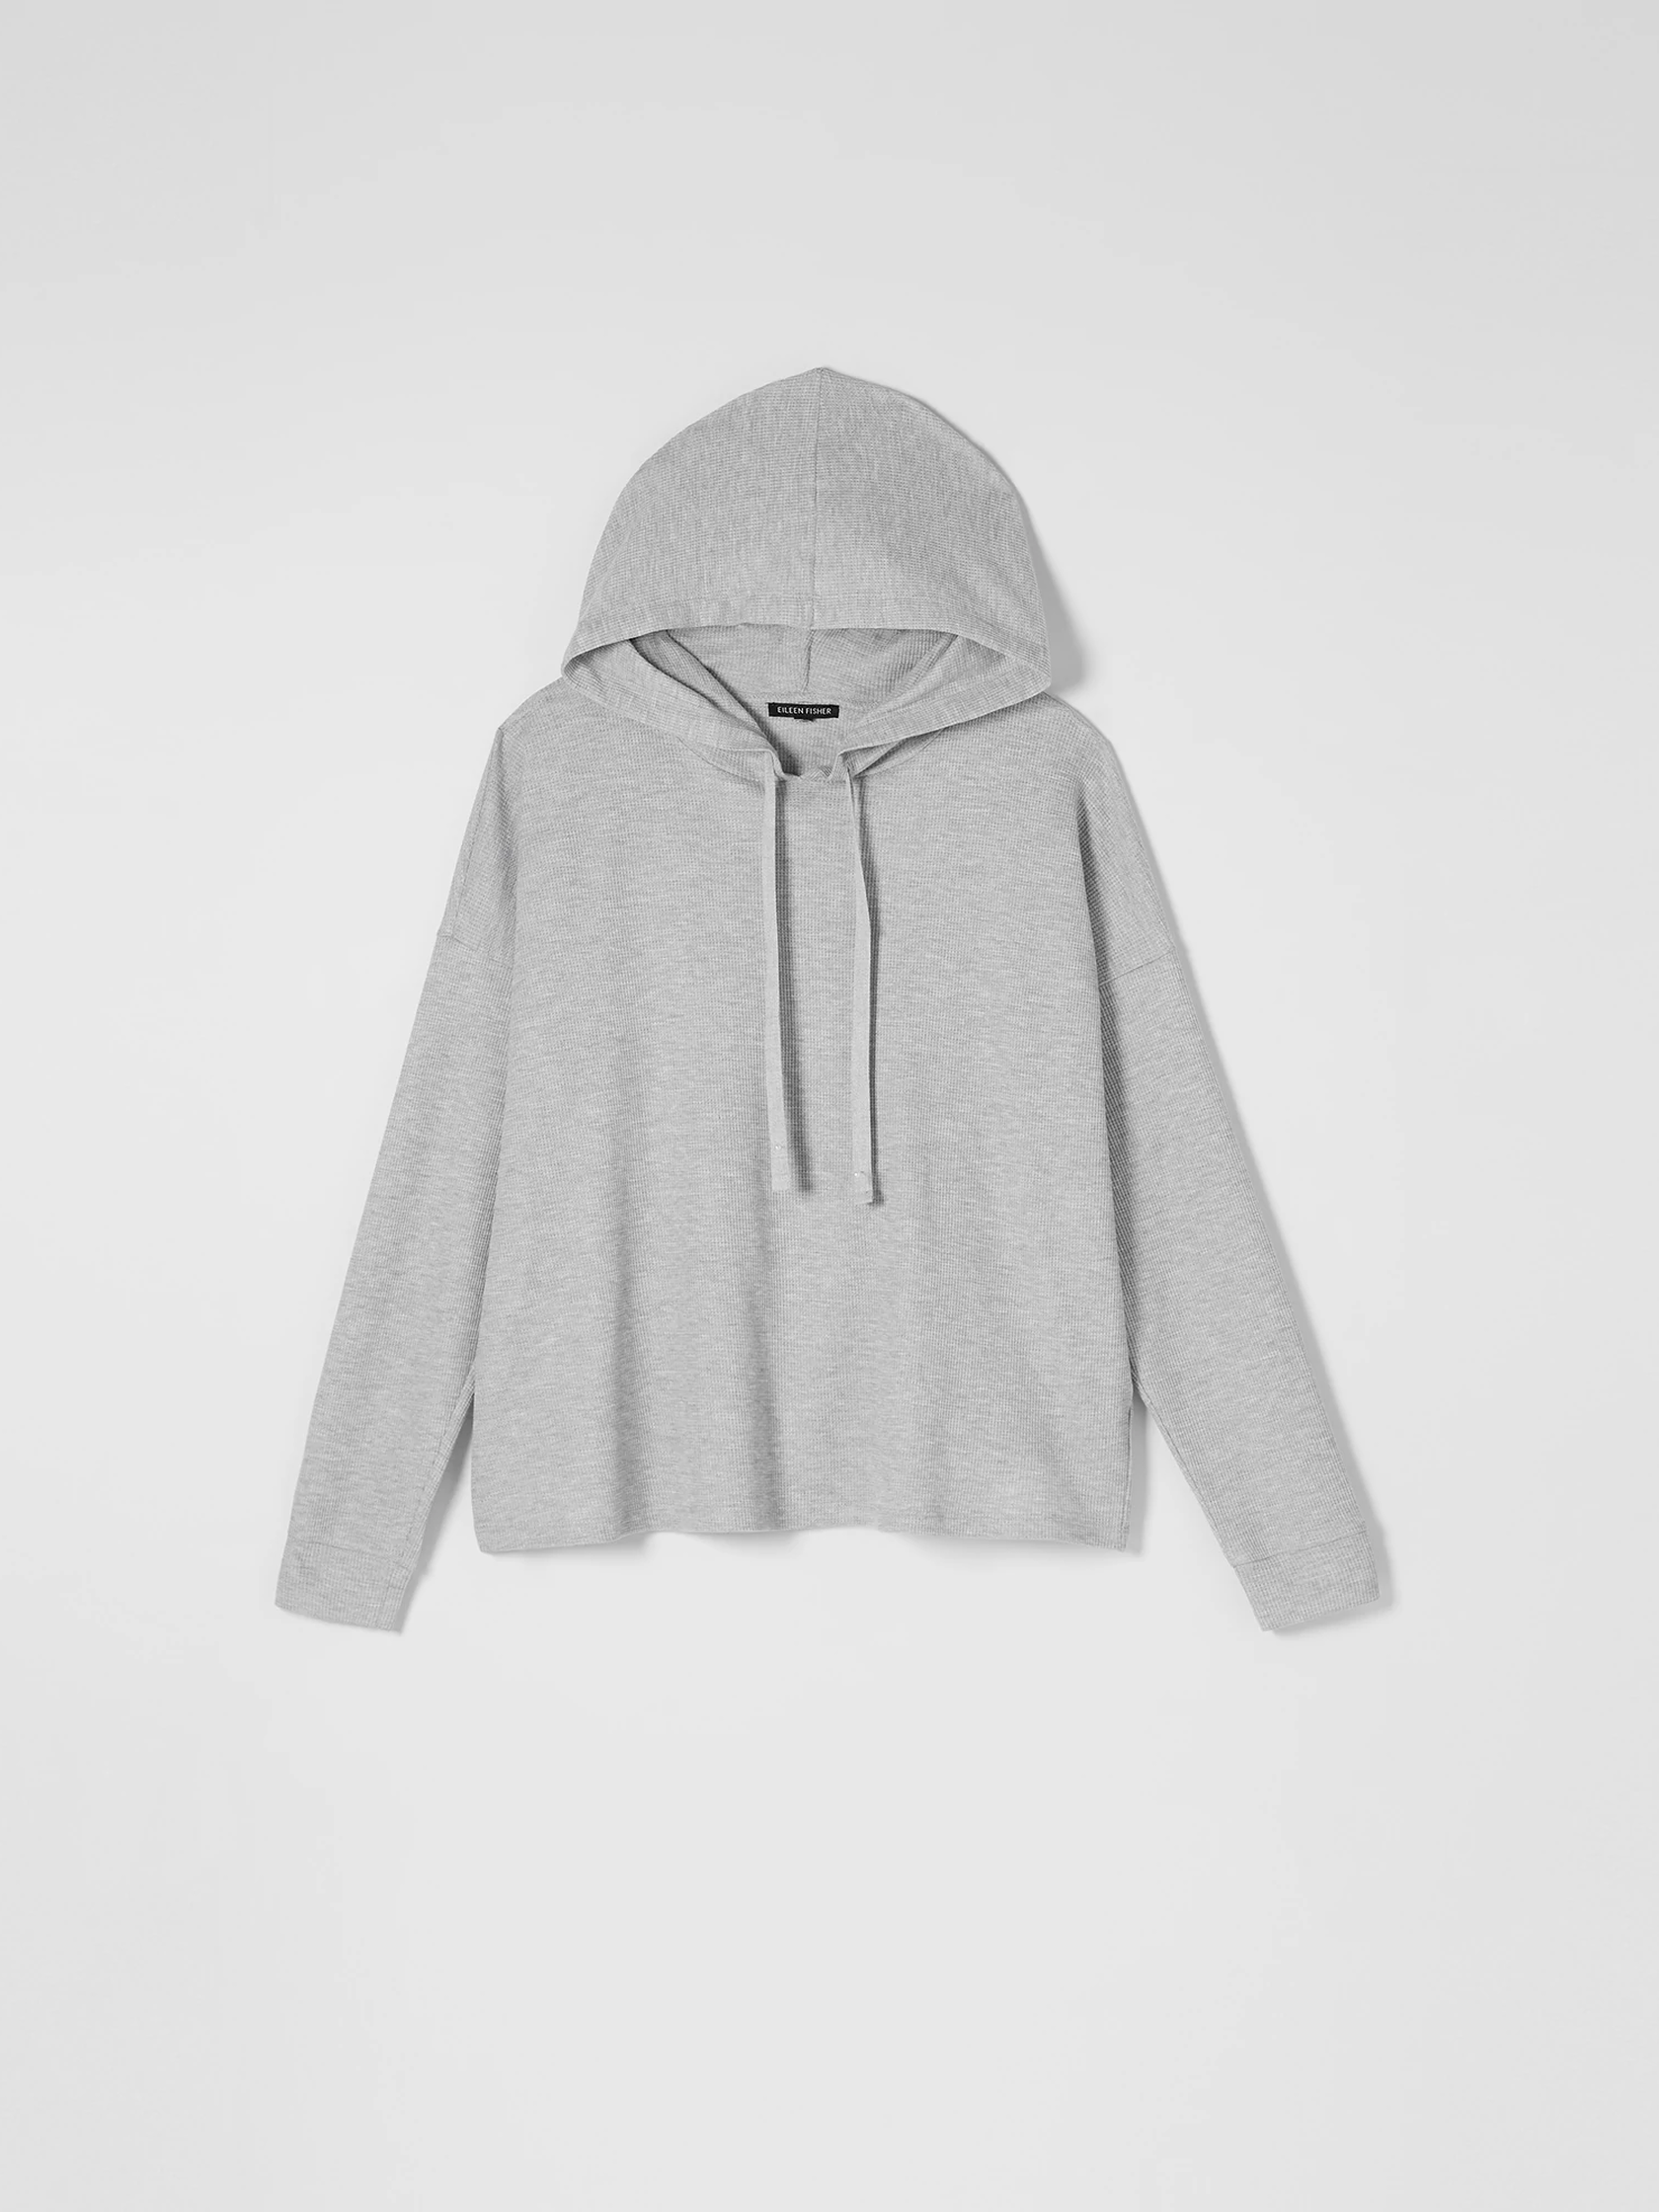 Cozy Waffle Knit Hooded Top